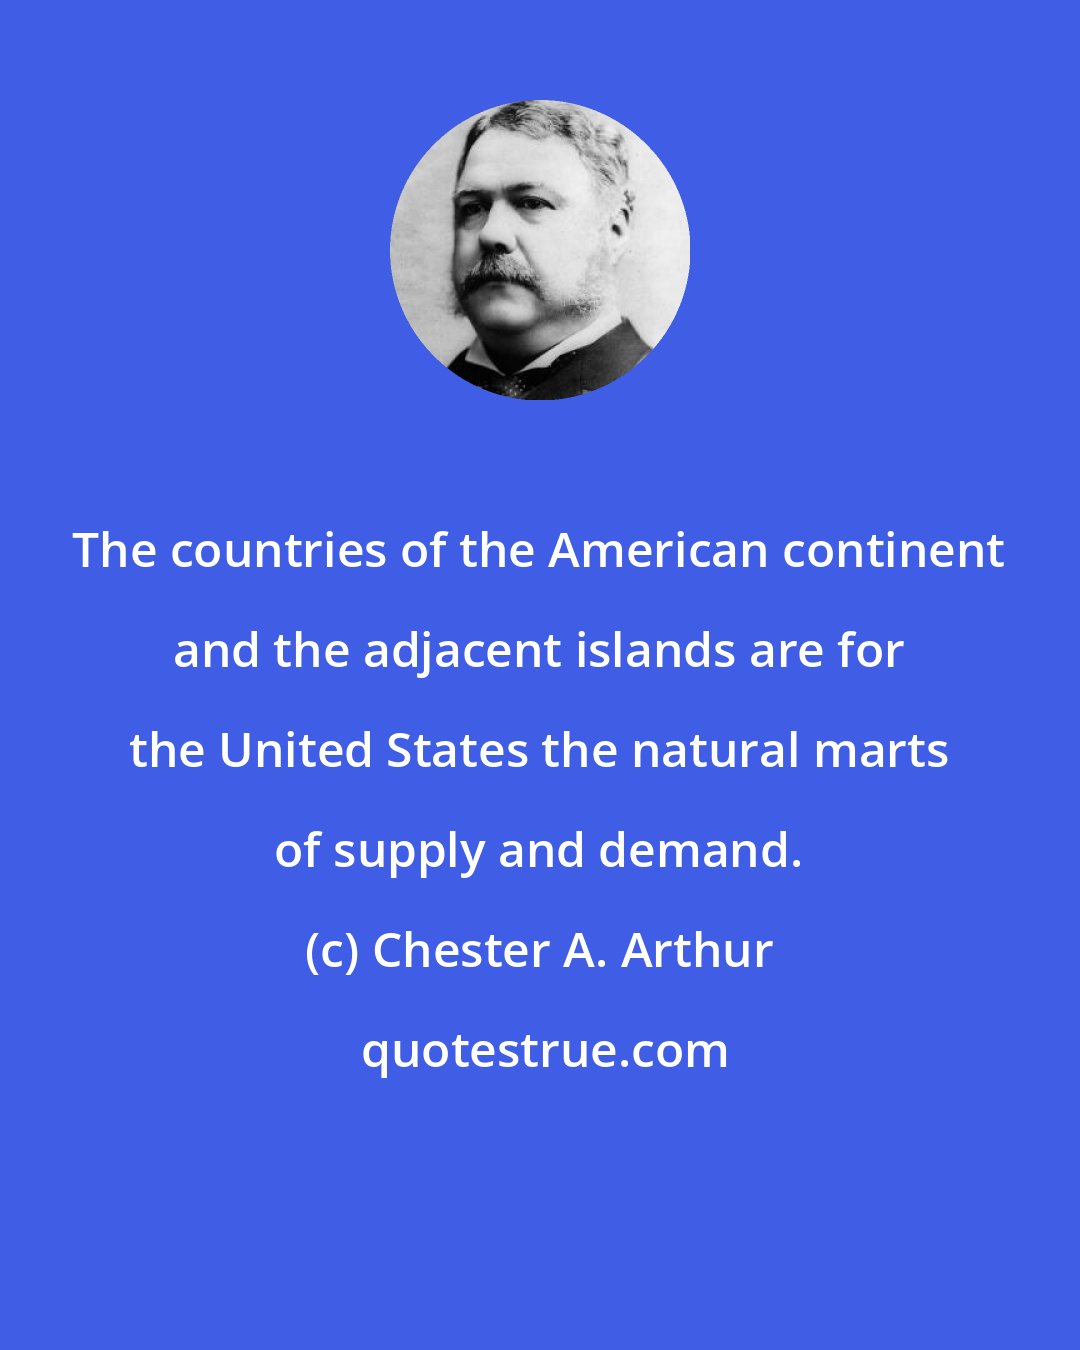 Chester A. Arthur: The countries of the American continent and the adjacent islands are for the United States the natural marts of supply and demand.